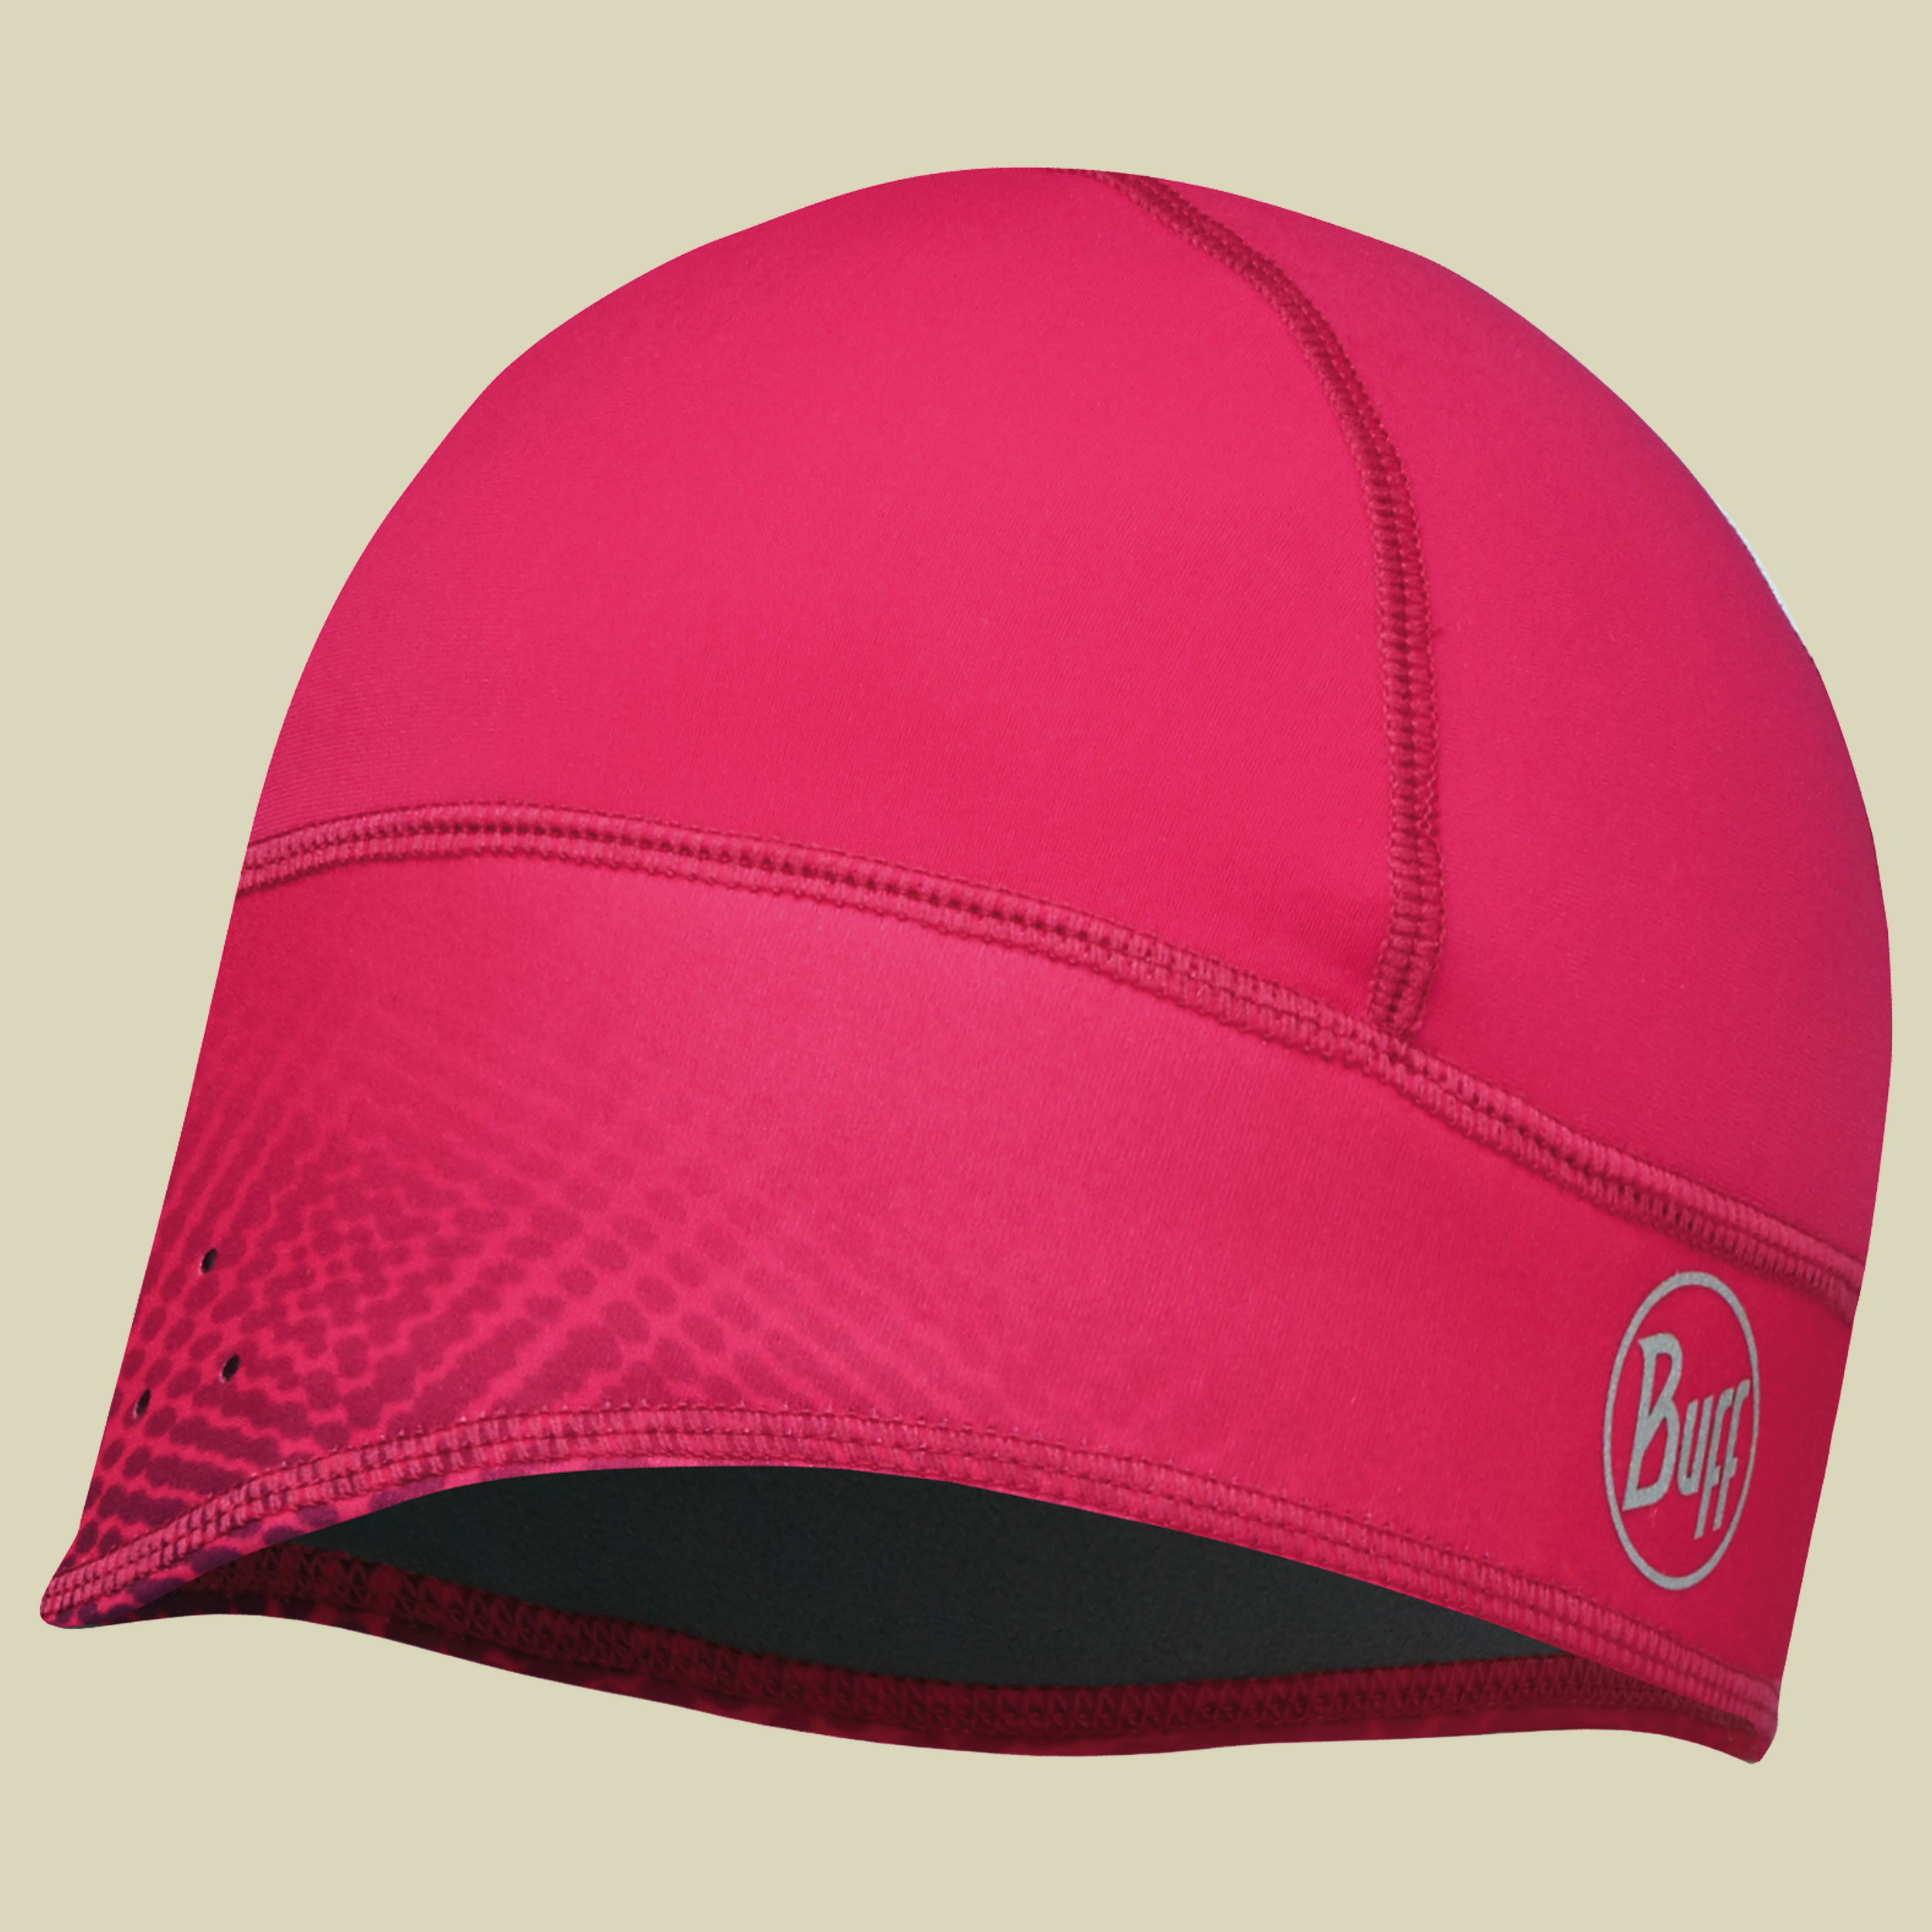 Windproof & Tech Fleece Hat Größe one size Farbe extreme pink